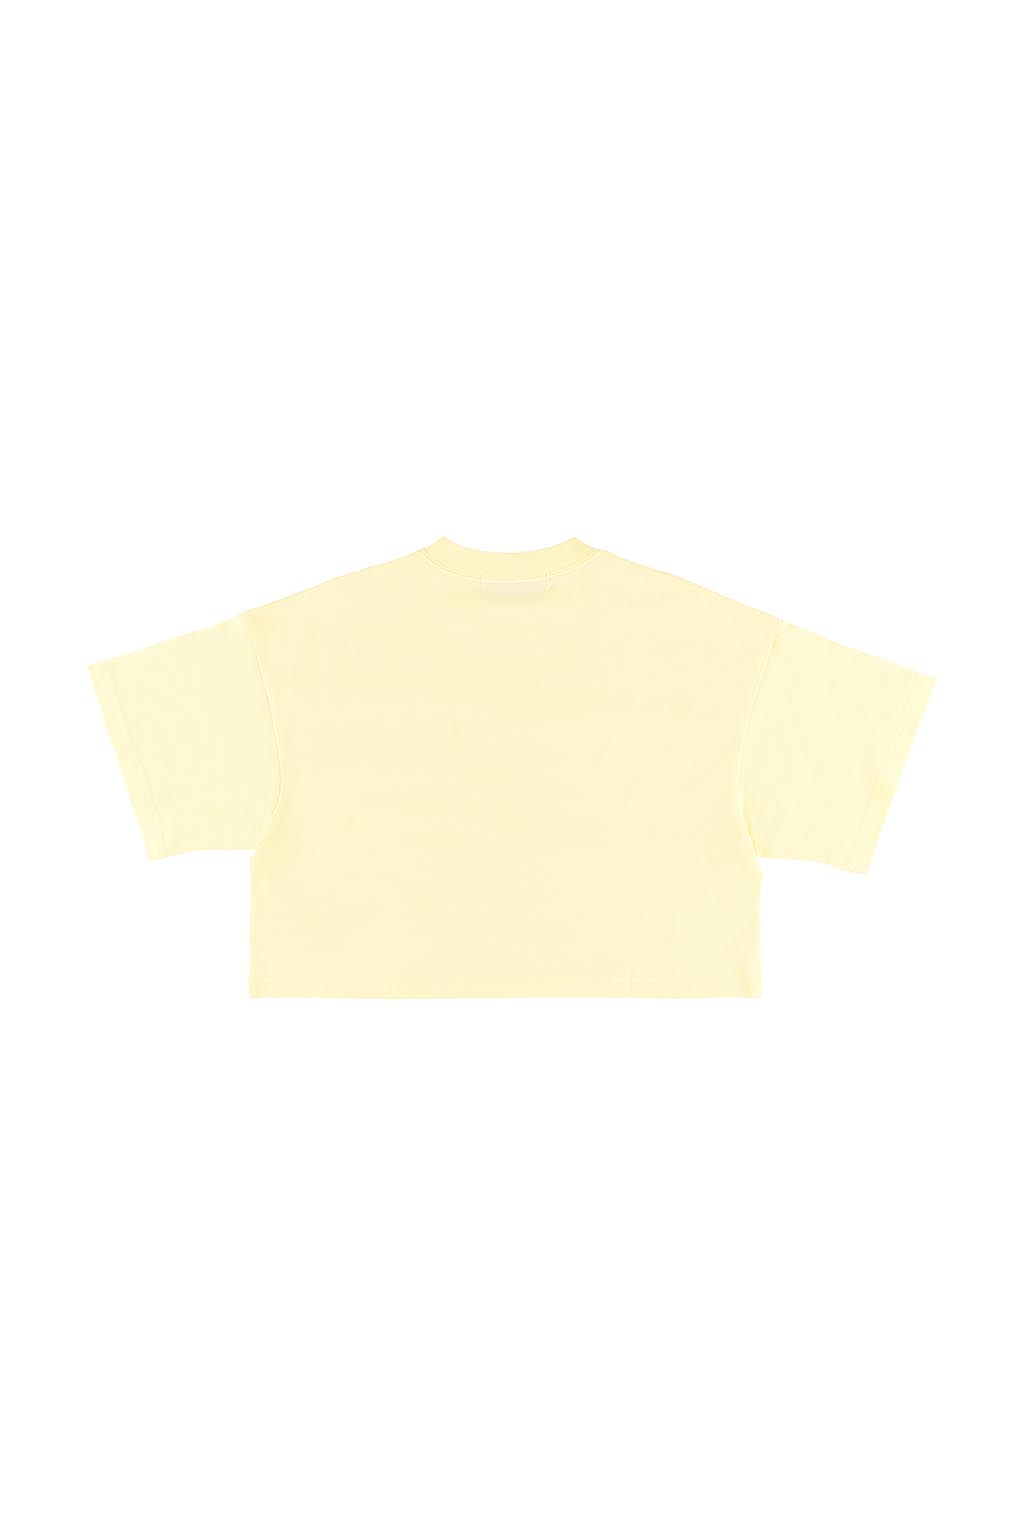 Front Message Tee Yellow 8